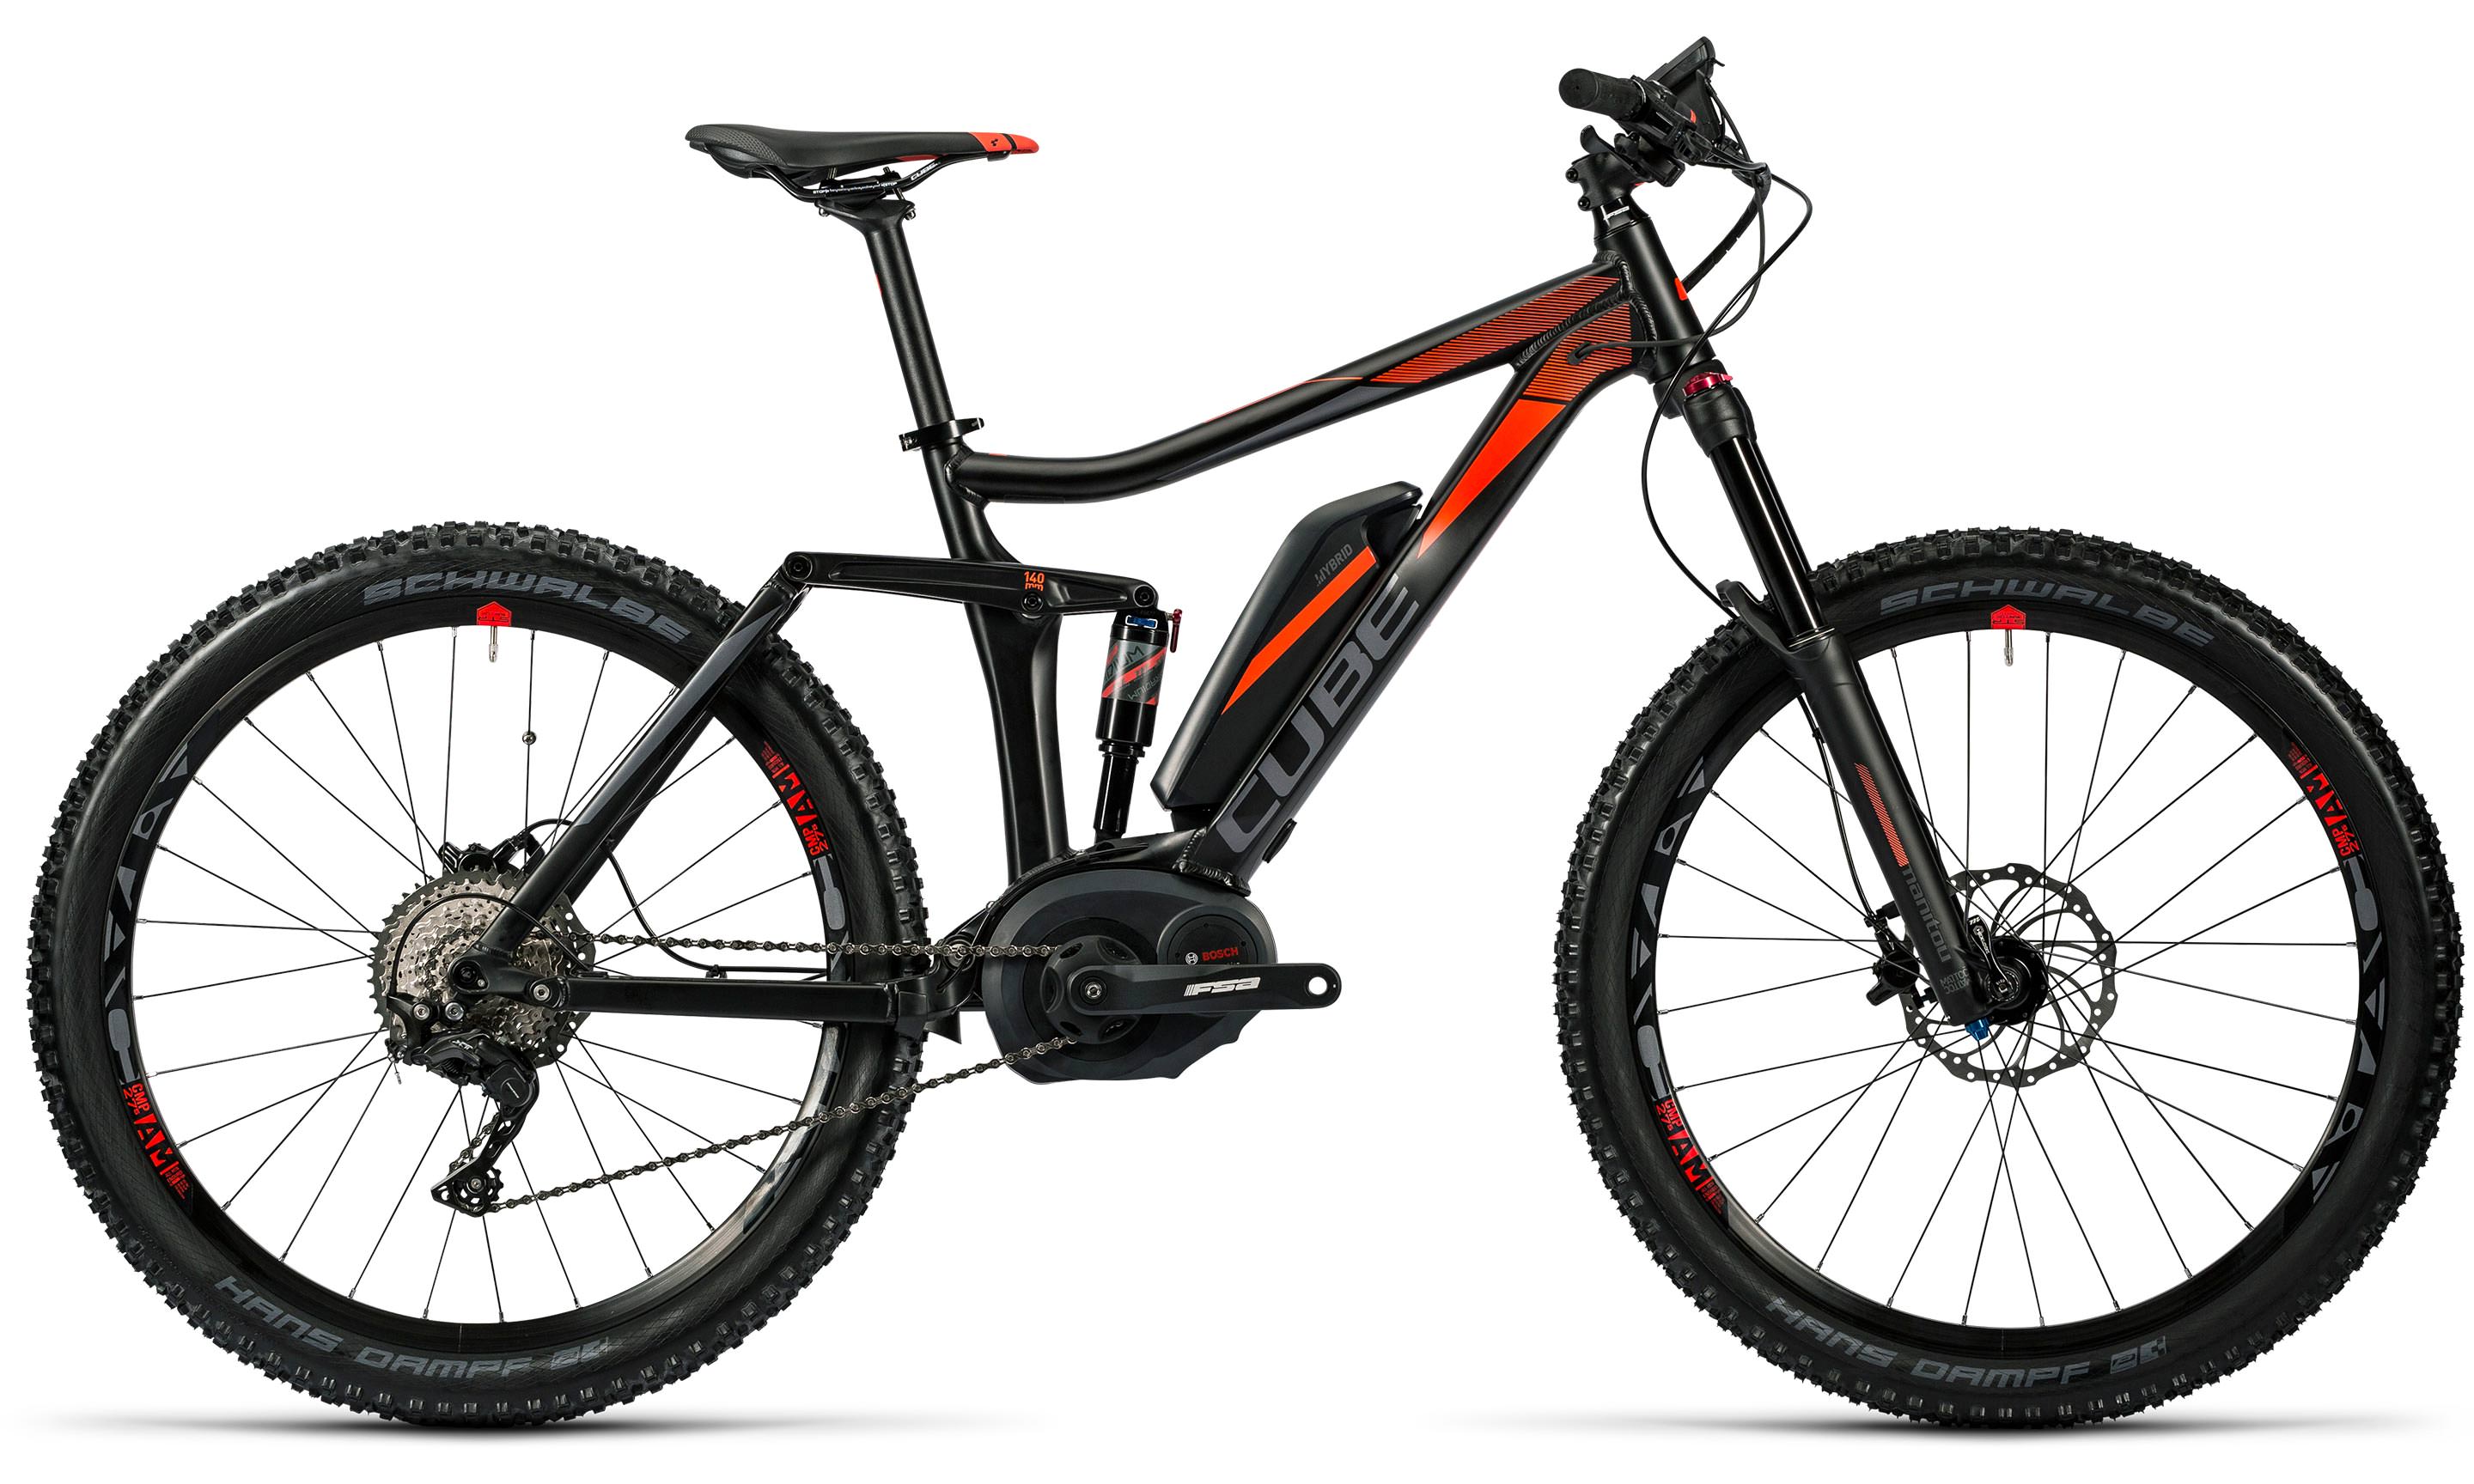 Stereo Hybrid 140 HPA Pro 27.5 black | Bouticycle